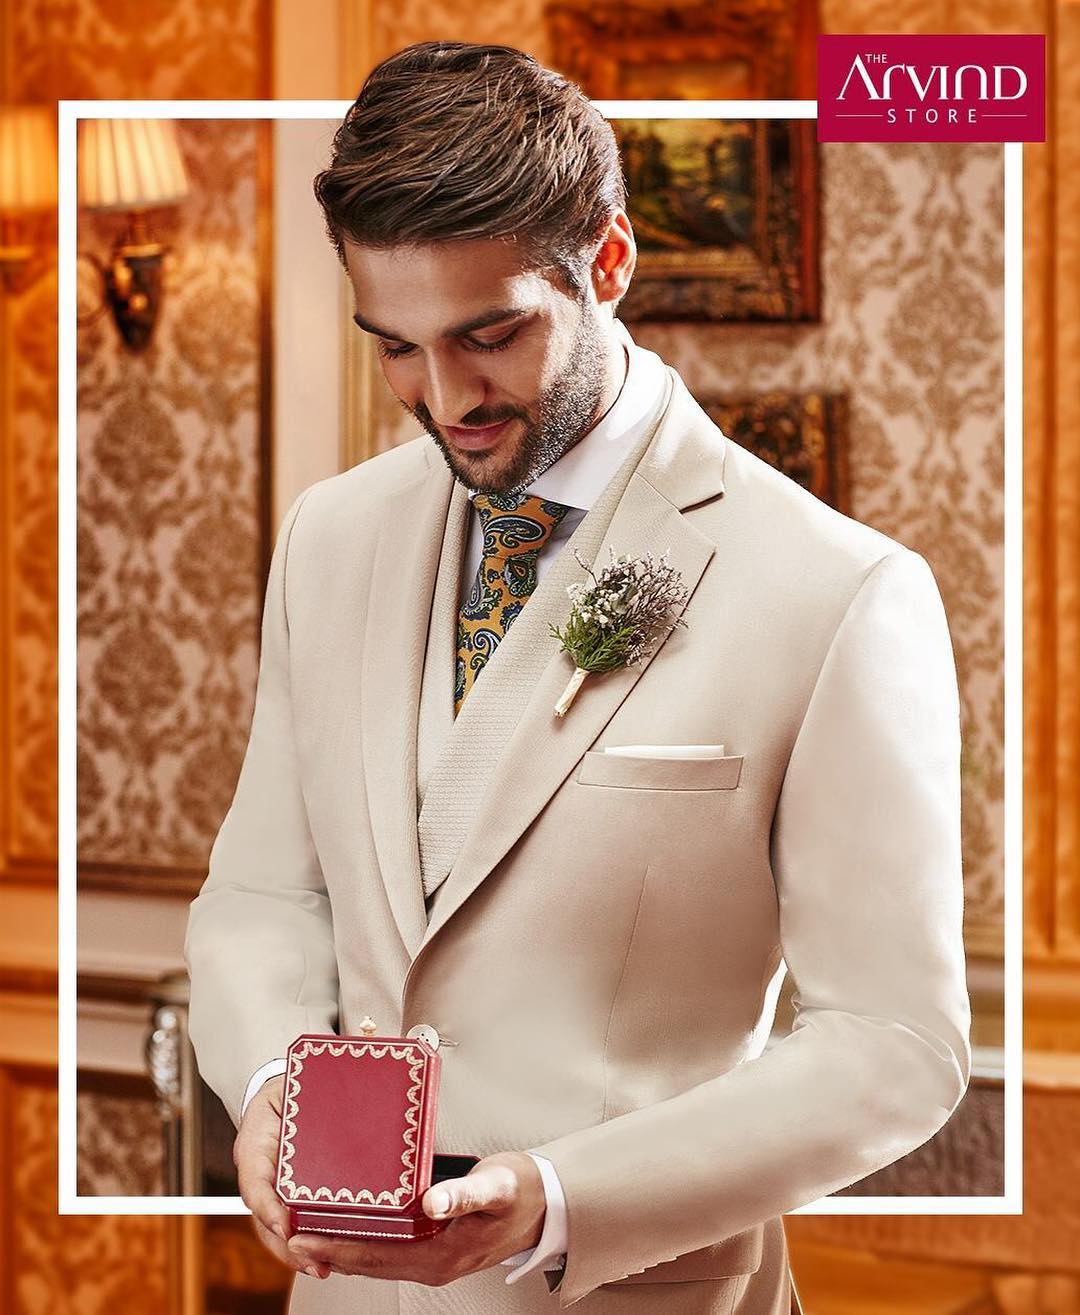 Get the outfit that resonates the wedding vibes from our ceremonial collection. Visit your nearest #TheArvindStore today –  Link in Bio

#celebrationwear #weddingwear #suits #royal #weddingsuits #bestdressed #menswear #handcrafted #groomsuit #designersuits #exclusive